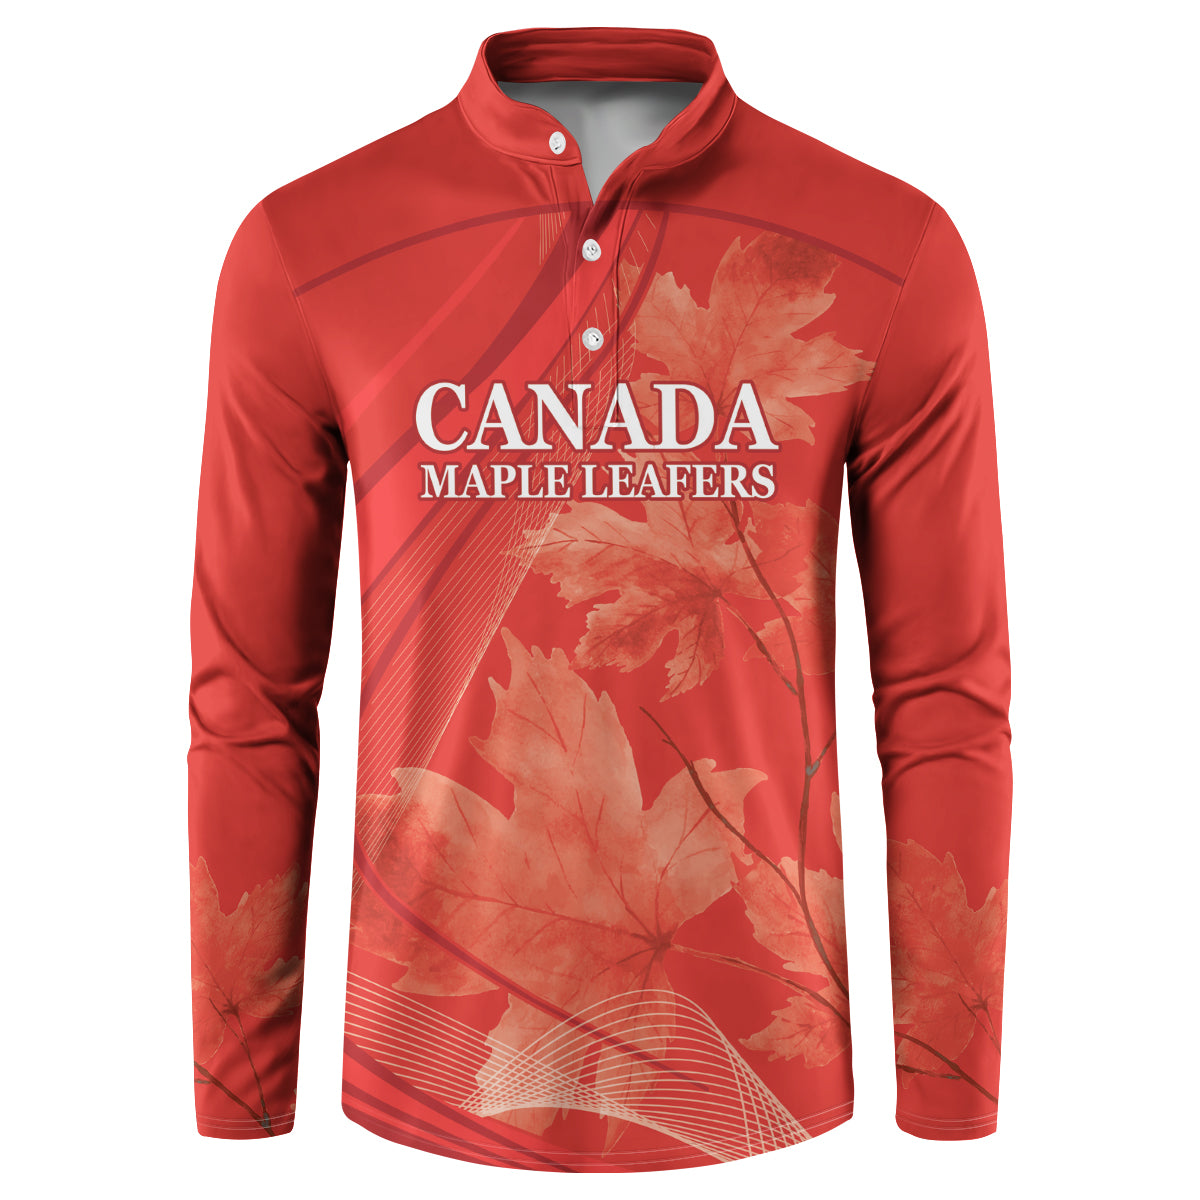 Canada Cricket World Cup 2024 Button Sweatshirt Maple Leafers Make Champions